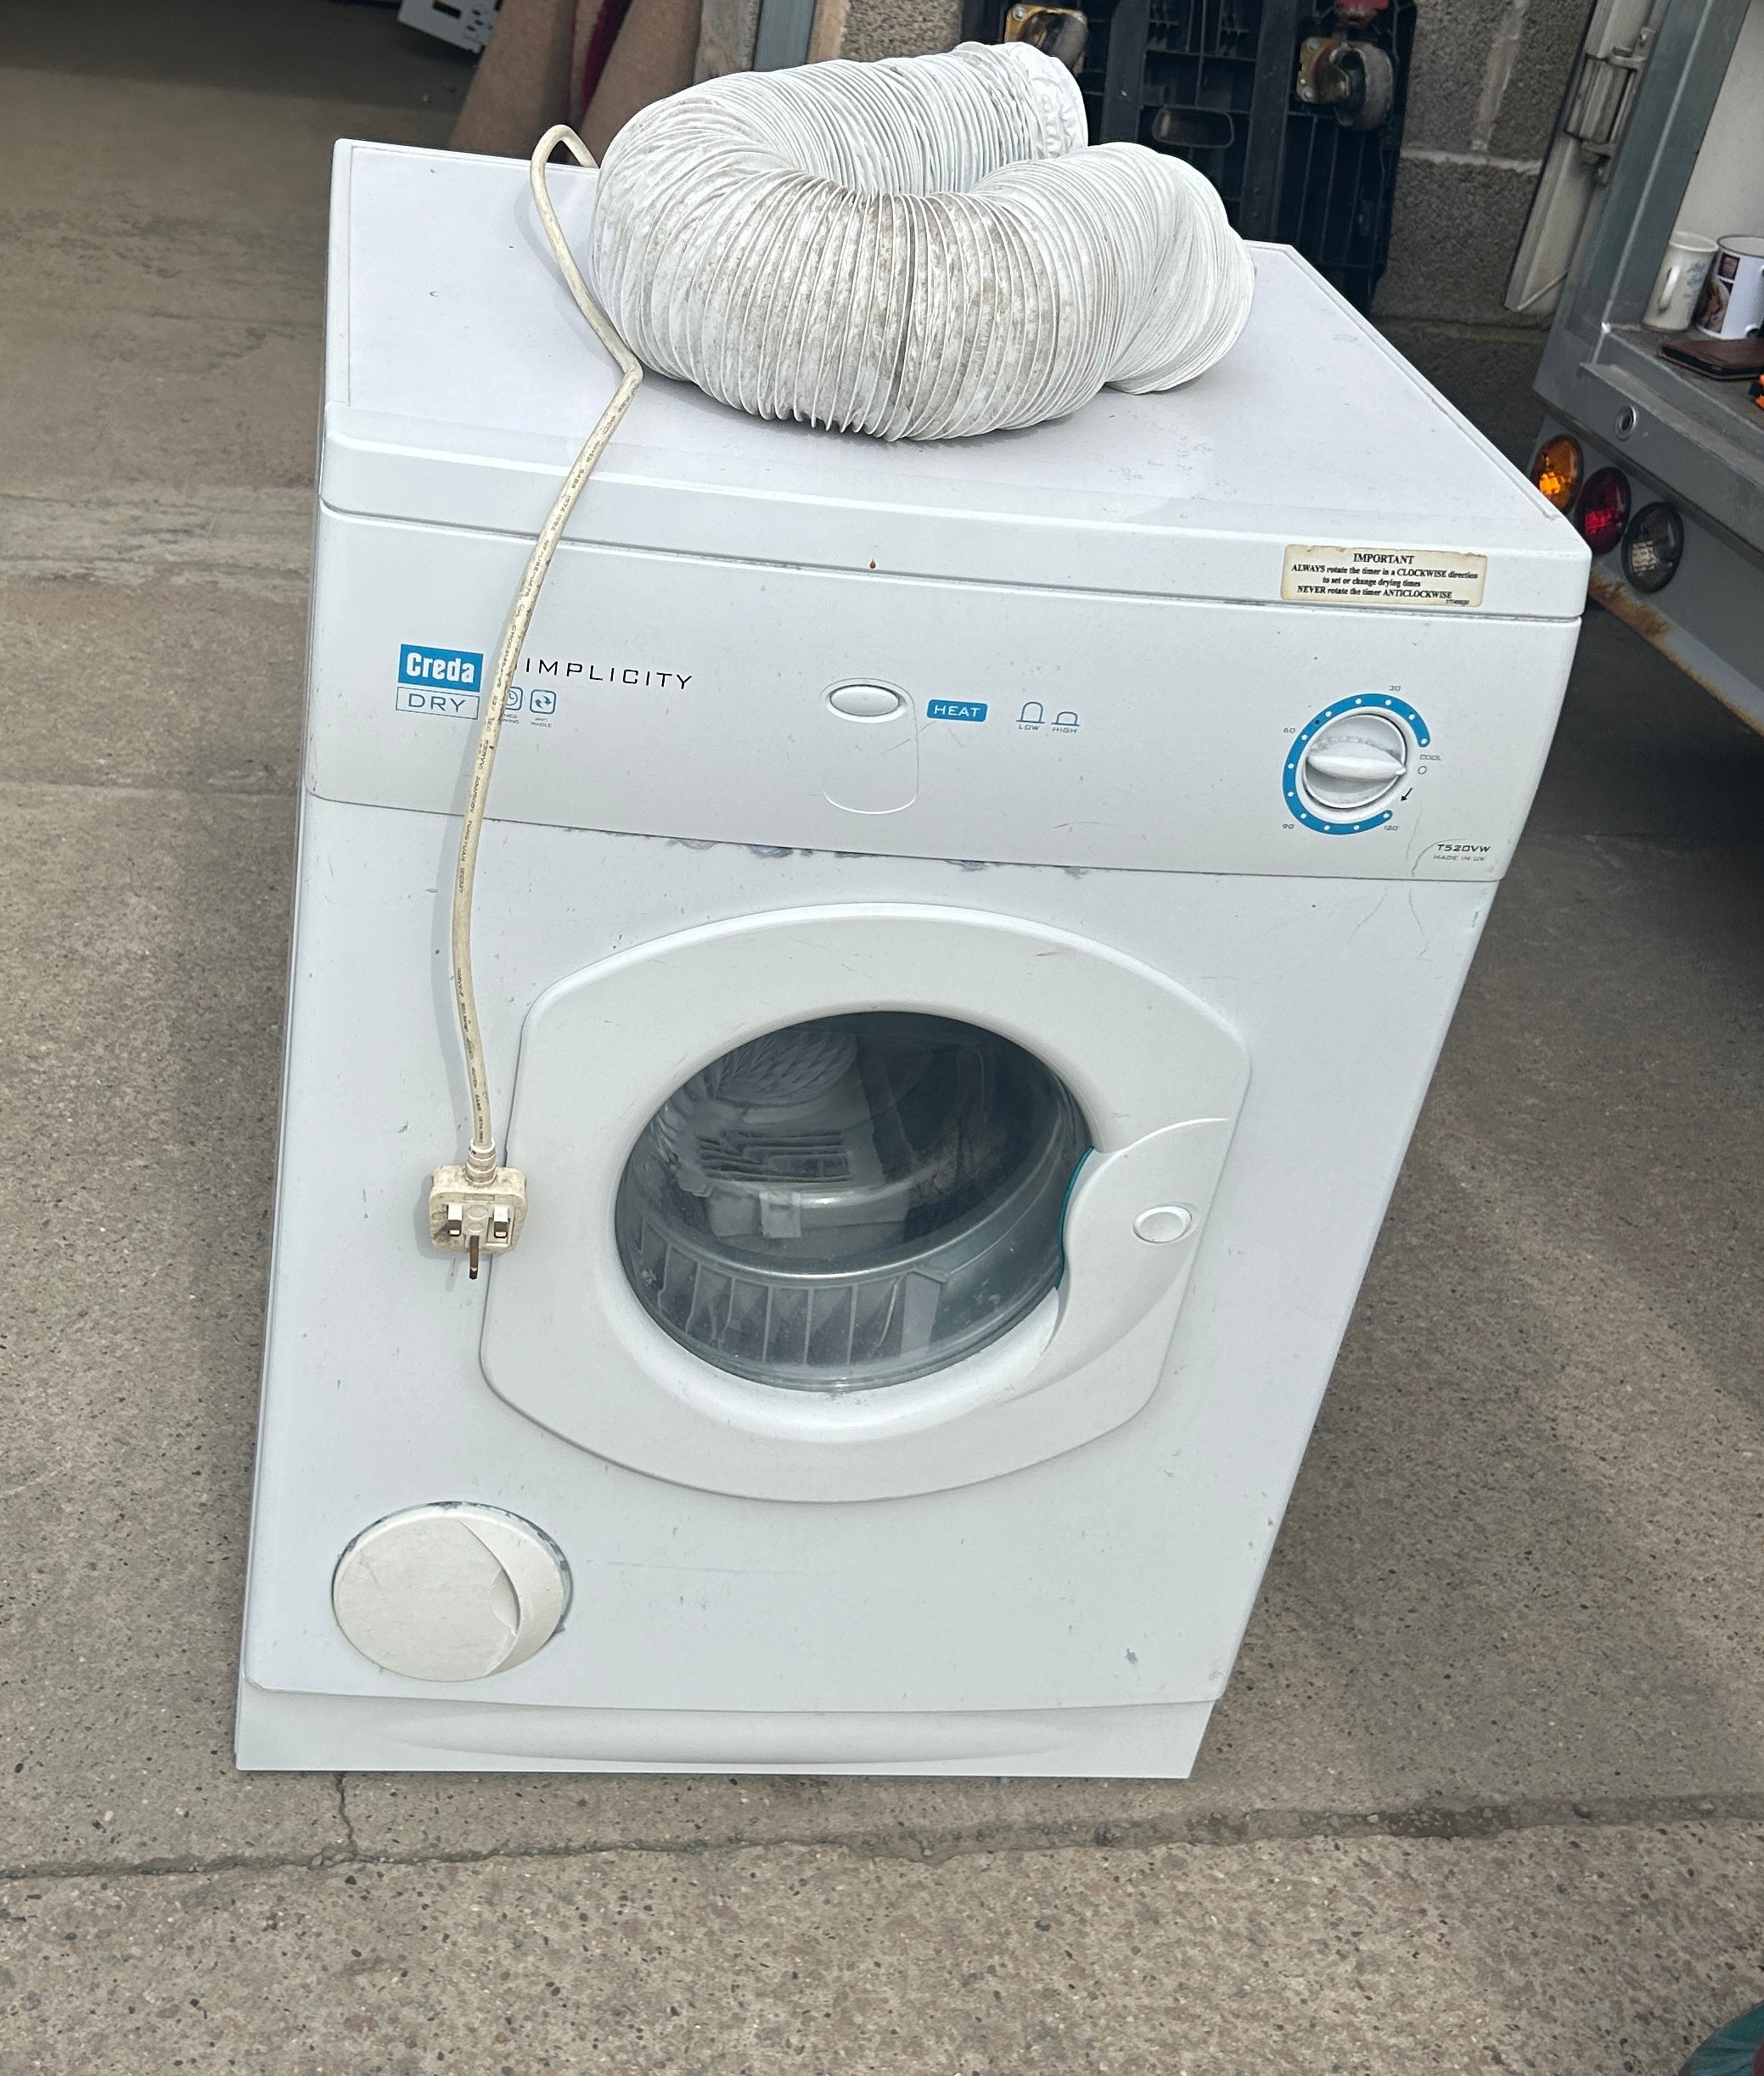 Creda dry tumble dryer in working order - Image 2 of 3